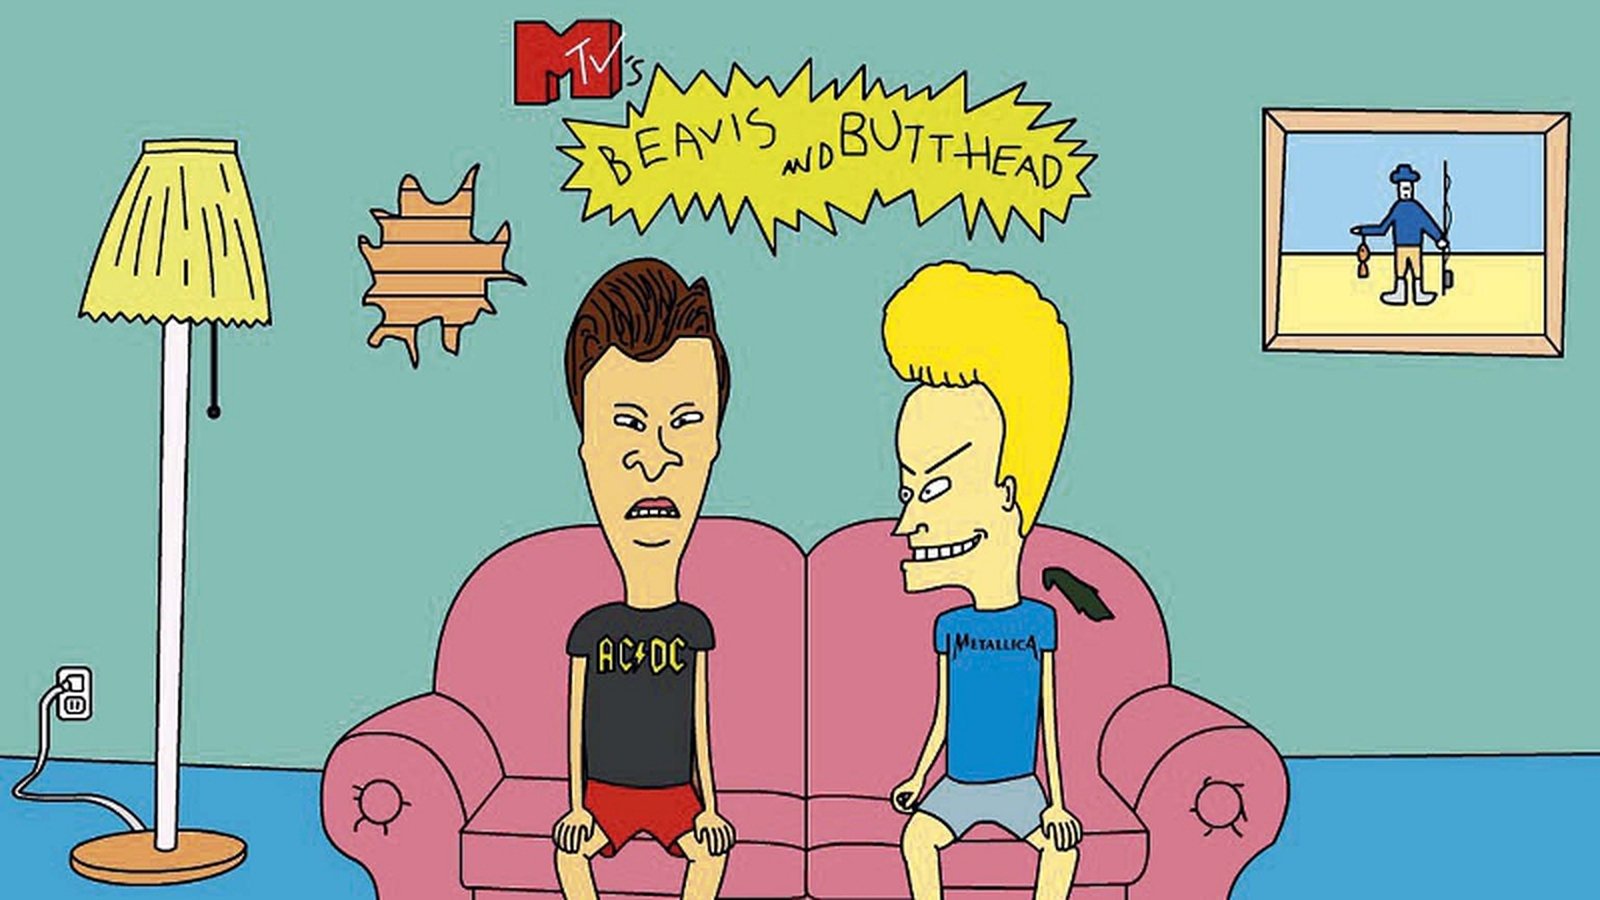 download beavis and butthead new seasons